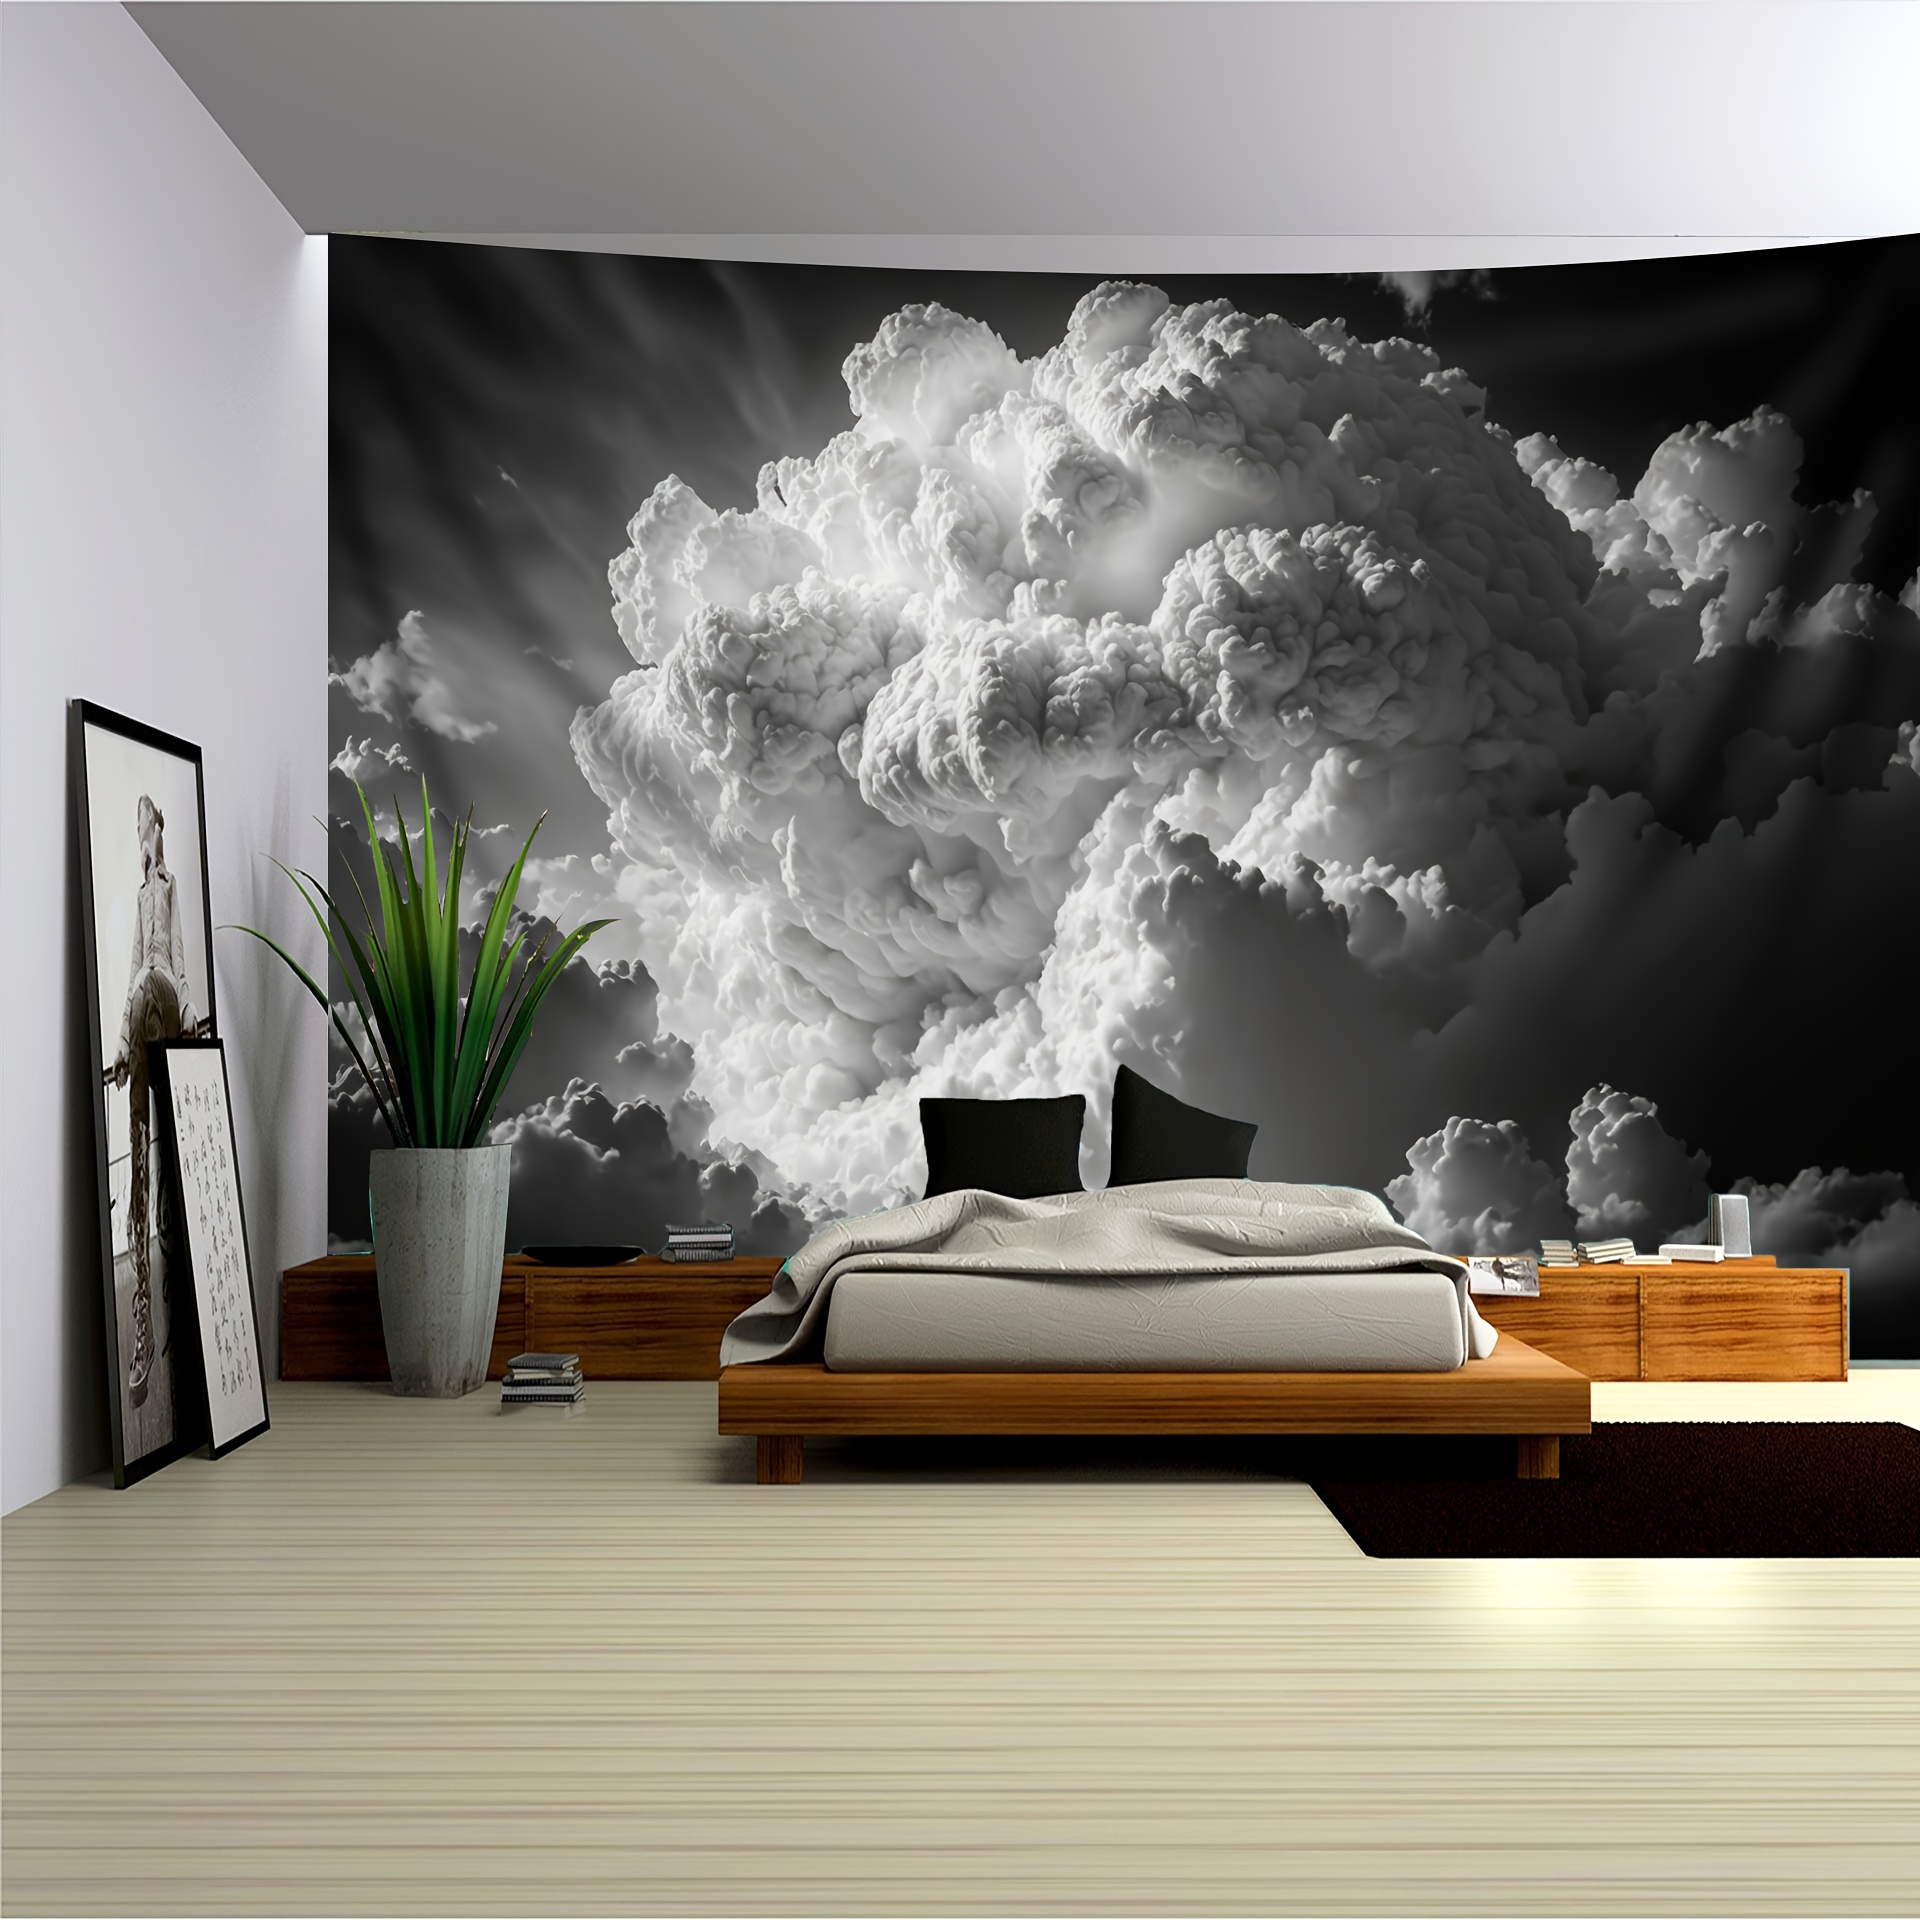 

1pc Cloudy Sky Tapestry, Large Size Photo Background, Bedroom Aesthetic Hanging Tapestry, For Bedroom Office Living Room Home Decor, With Free Accessories